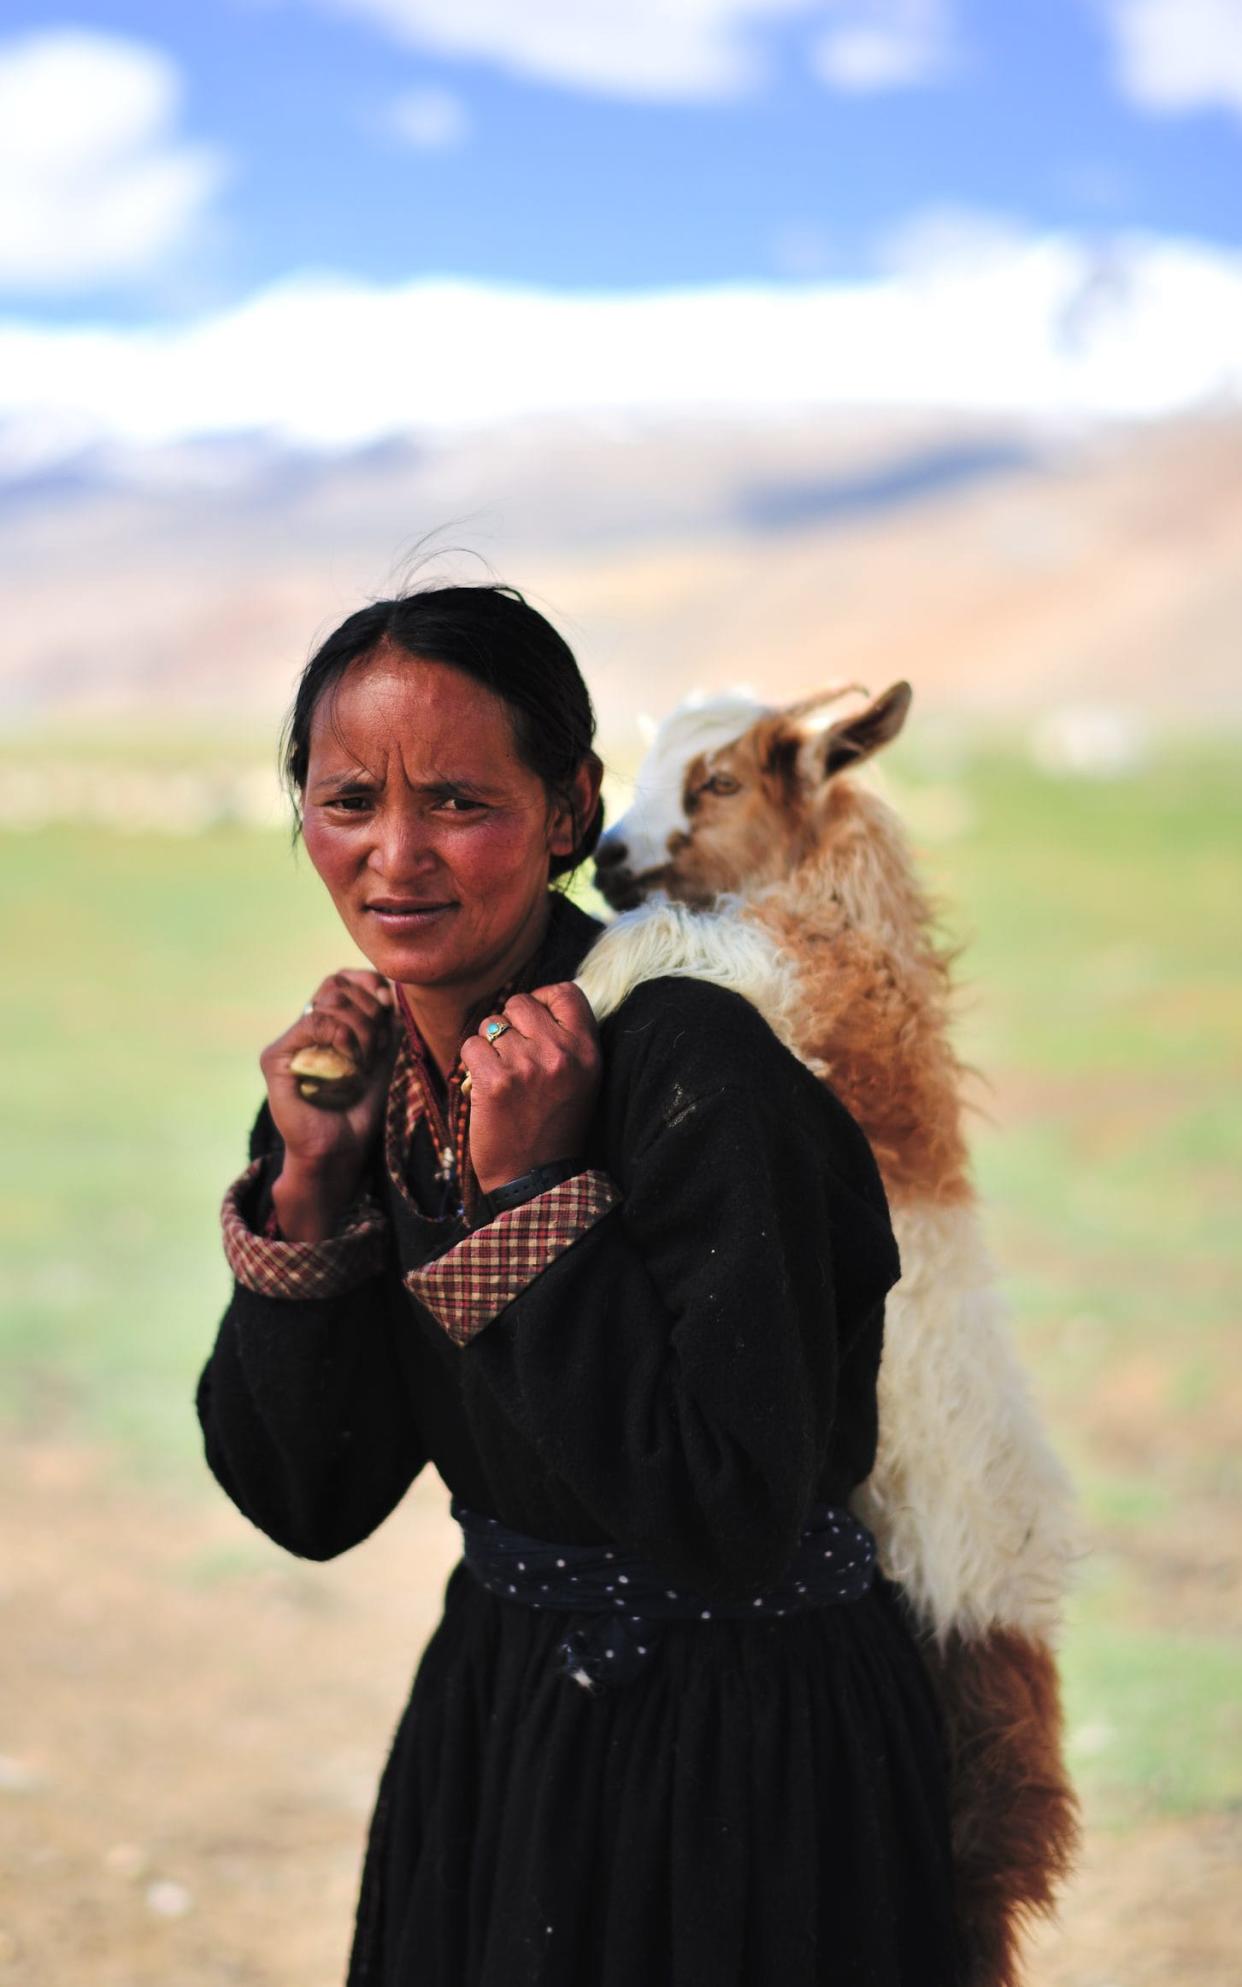 A Changpa nomadic lady carries a much-prized baby goat - DAVID DE VLEESCHAUWER